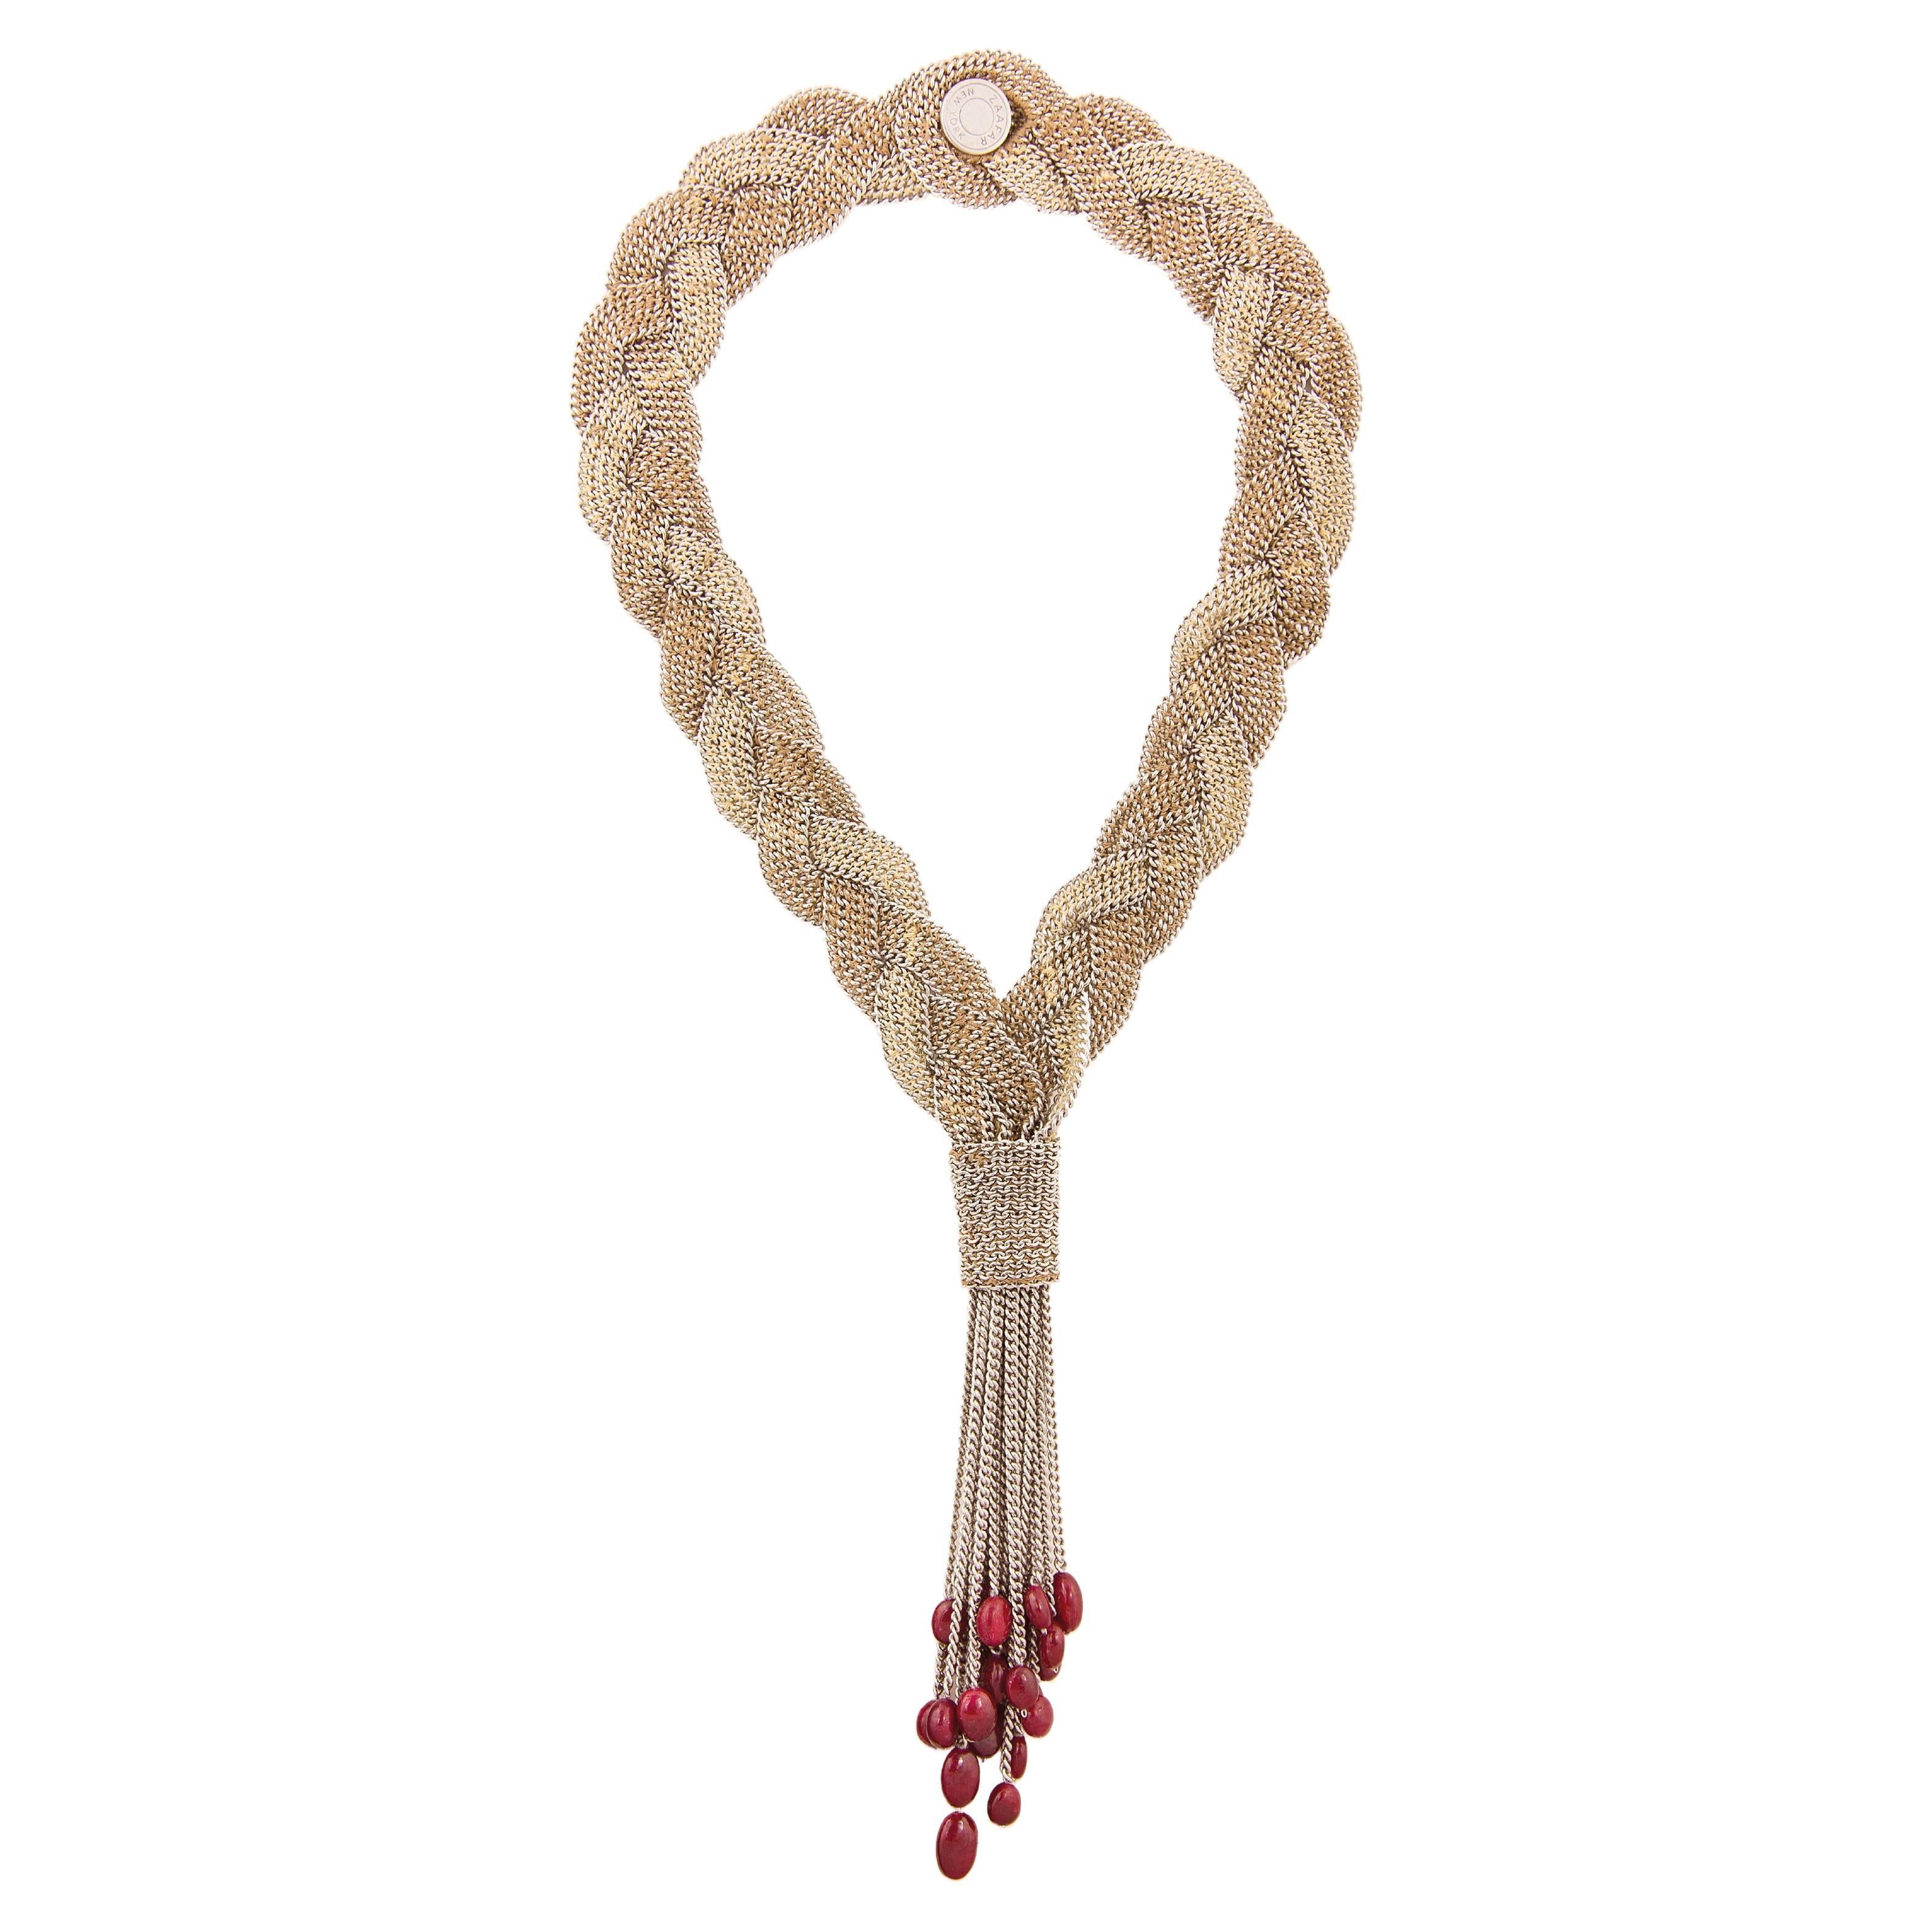 The Braid Necklace- Hand-sewn with Ruby